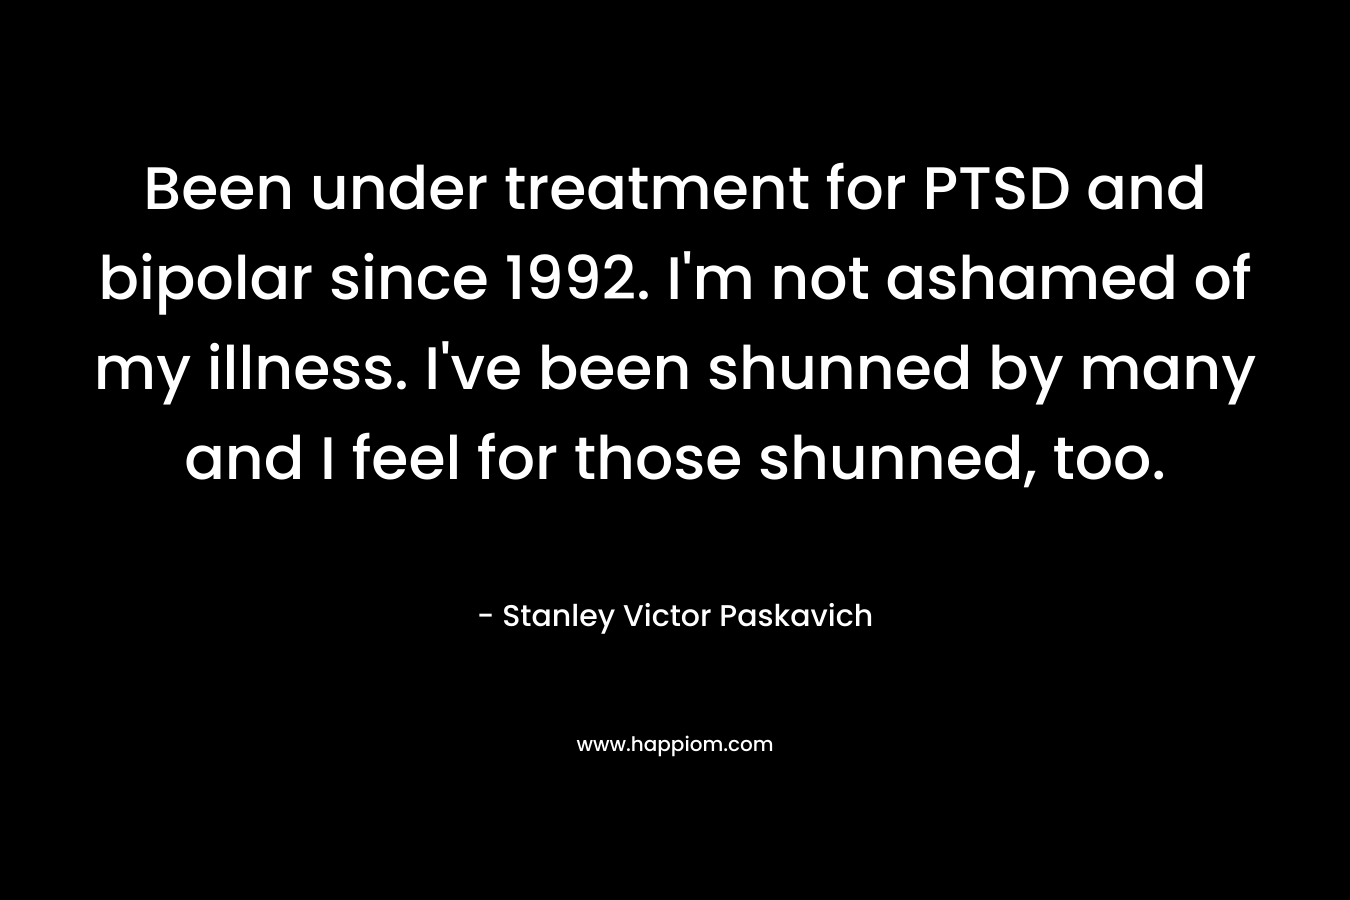 Been under treatment for PTSD and bipolar since 1992. I’m not ashamed of my illness. I’ve been shunned by many and I feel for those shunned, too. – Stanley Victor Paskavich